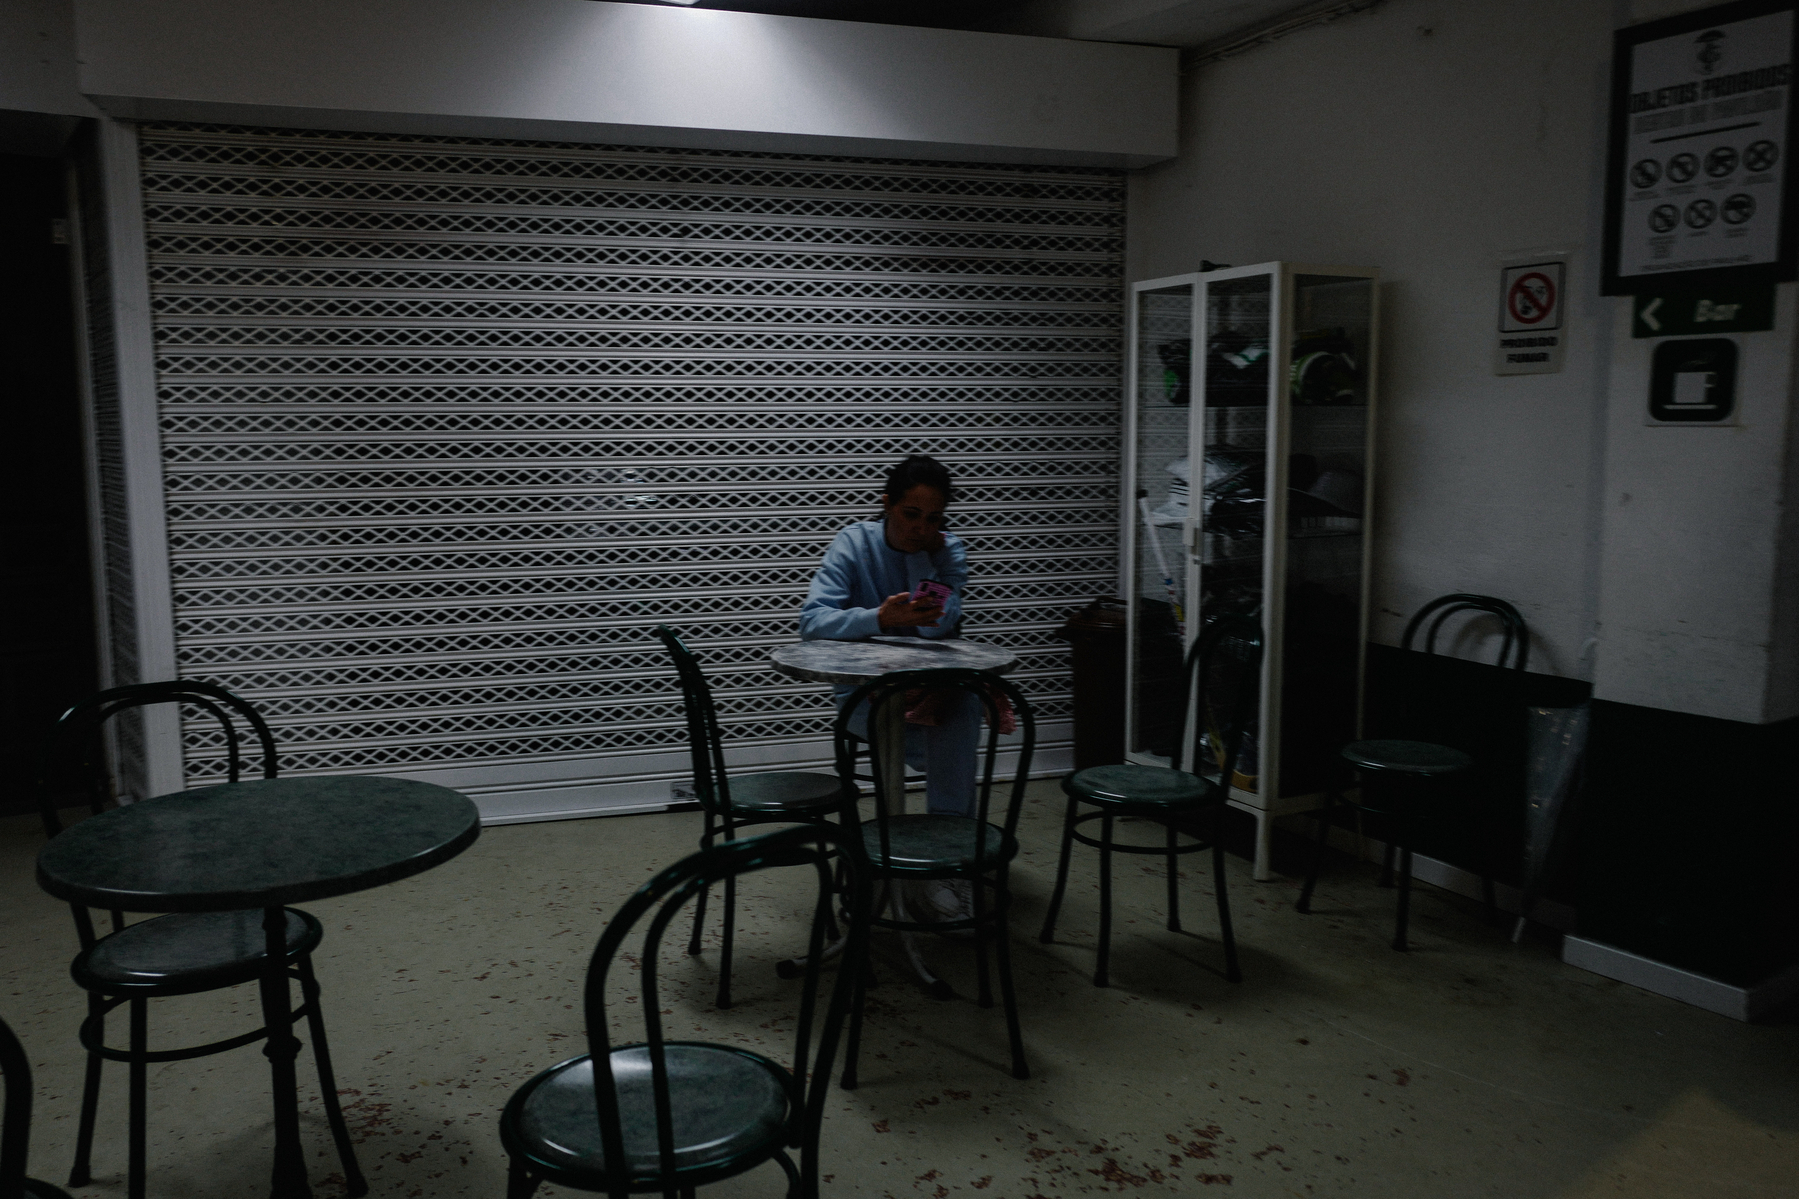 A dimly lit interior of a café with a closed metal security gate. In the center, a person sits at a small round table, engrossed in their smartphone. There are empty chairs and another table nearby, with a display cabinet and a